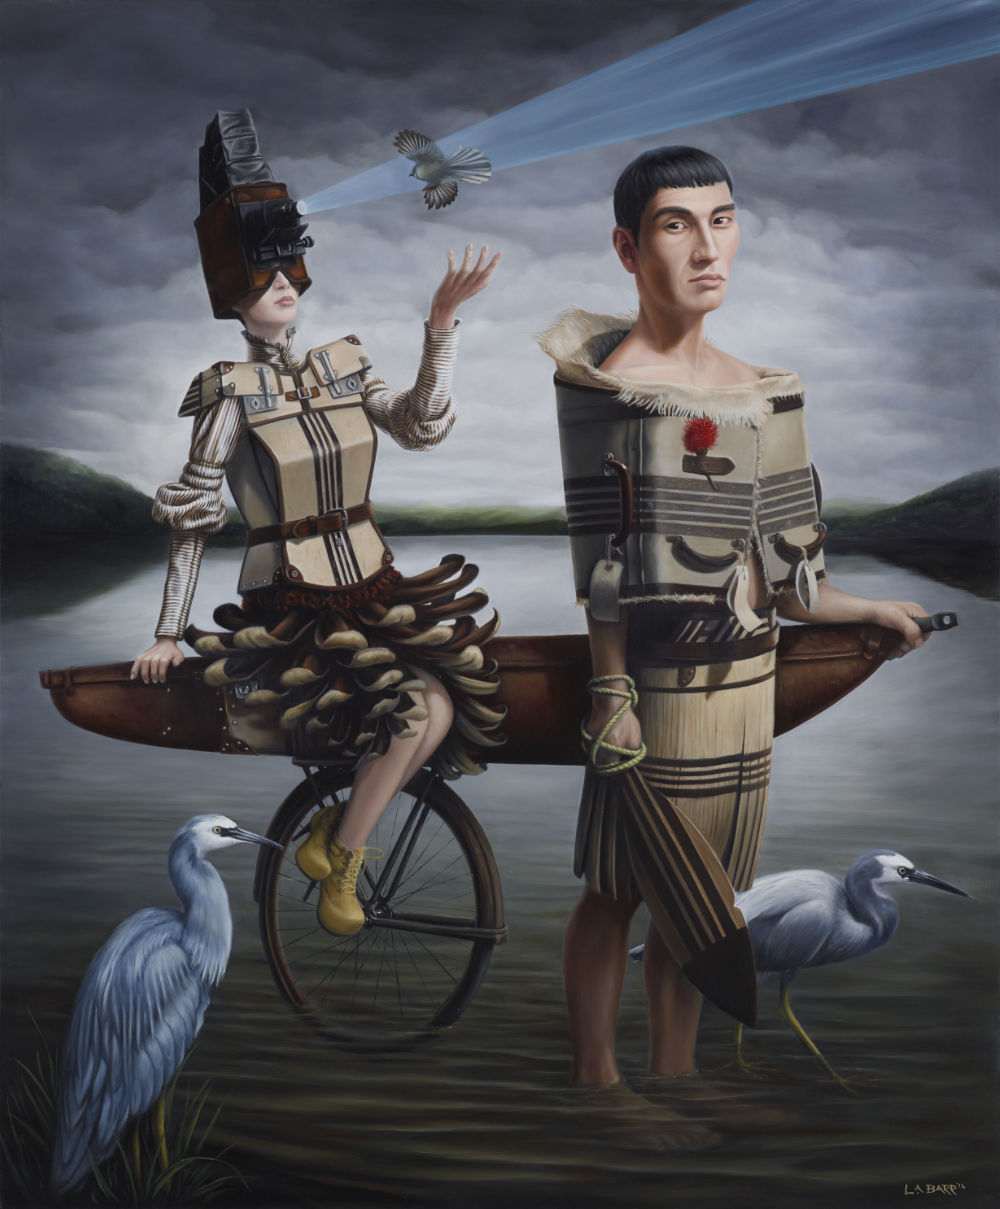 Contemporary oil painting of a couple in water with winning WOW costume